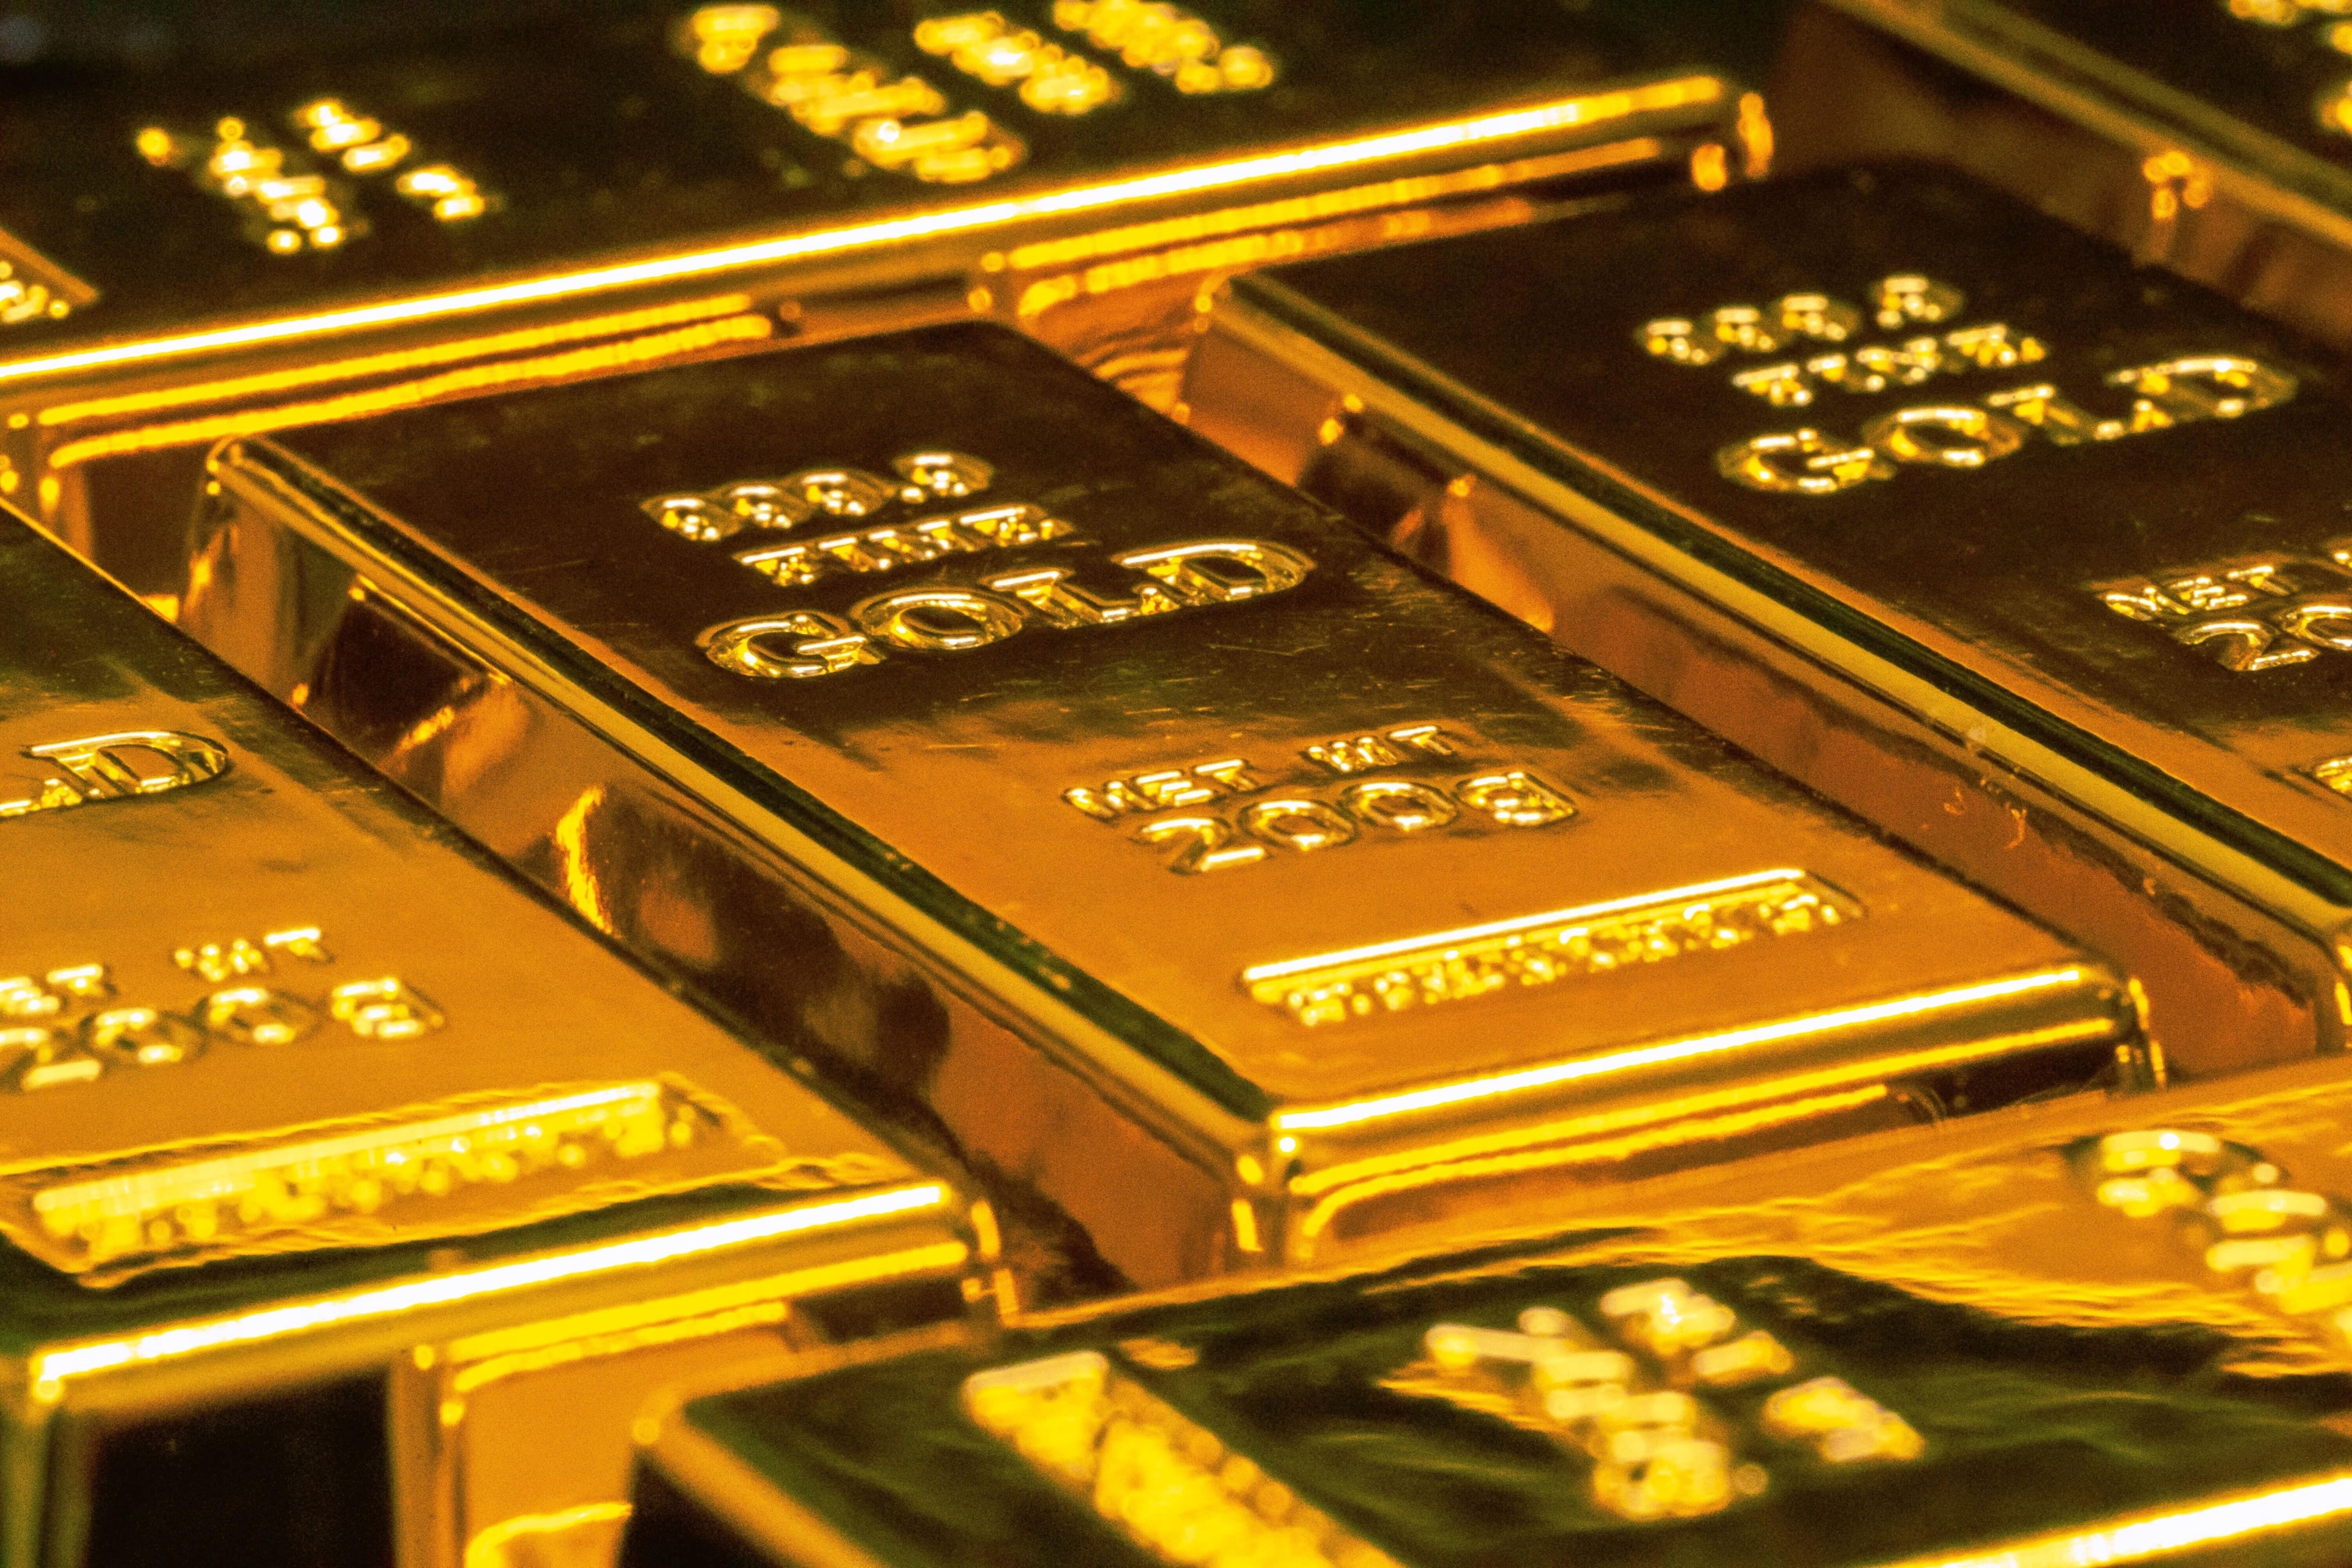 Gold prices fell over 1 percent to a near one-week low on March 22 as Treasury yields jumped after US Federal Reserve Chair Jerome Powell hinted at big rate hikes this year to fight against soaring inflation.